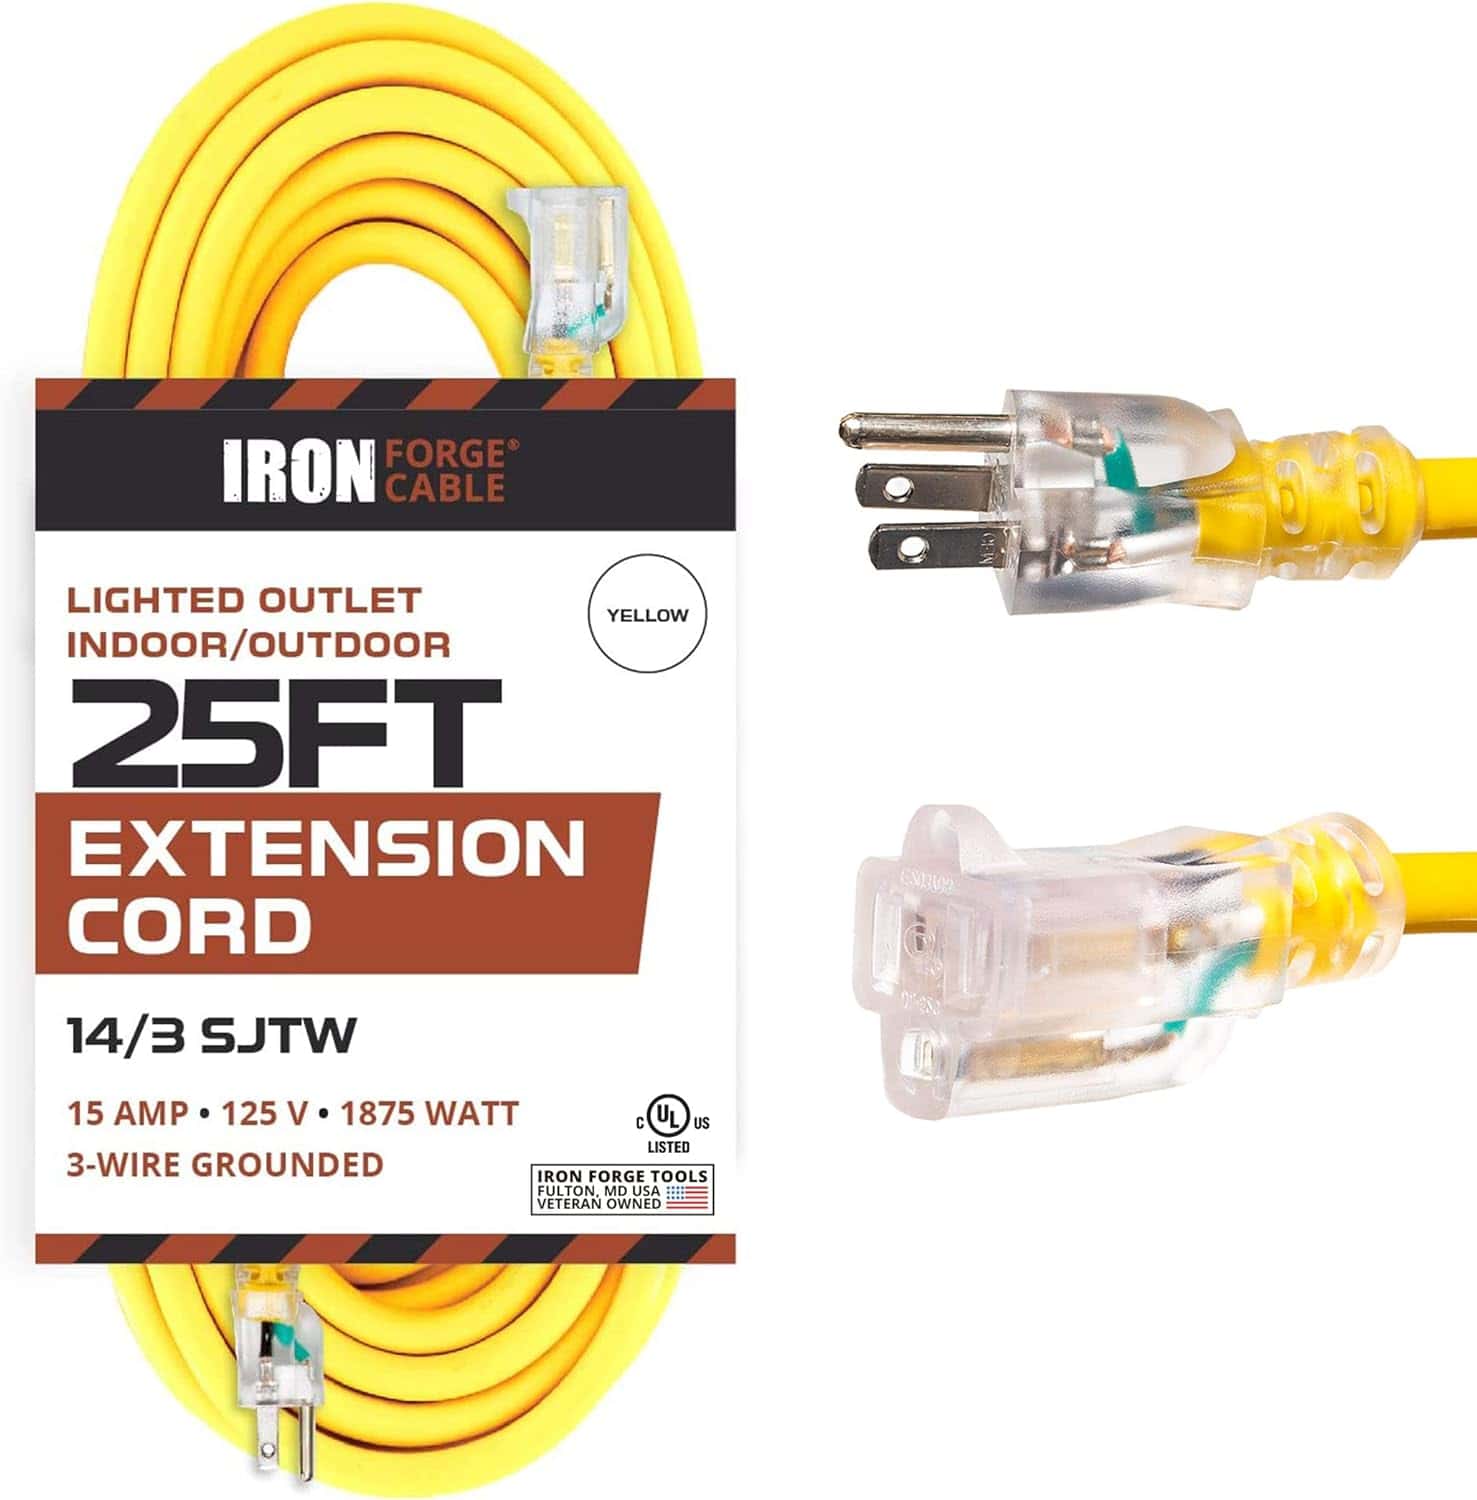 25 Foot Lighted Outdoor Extension Cord – 14 3 SJTW Heavy Duty Yellow Extension Cable with 3 Prong Grounded Plug for Safety – Great for Garden and Major Appliance1